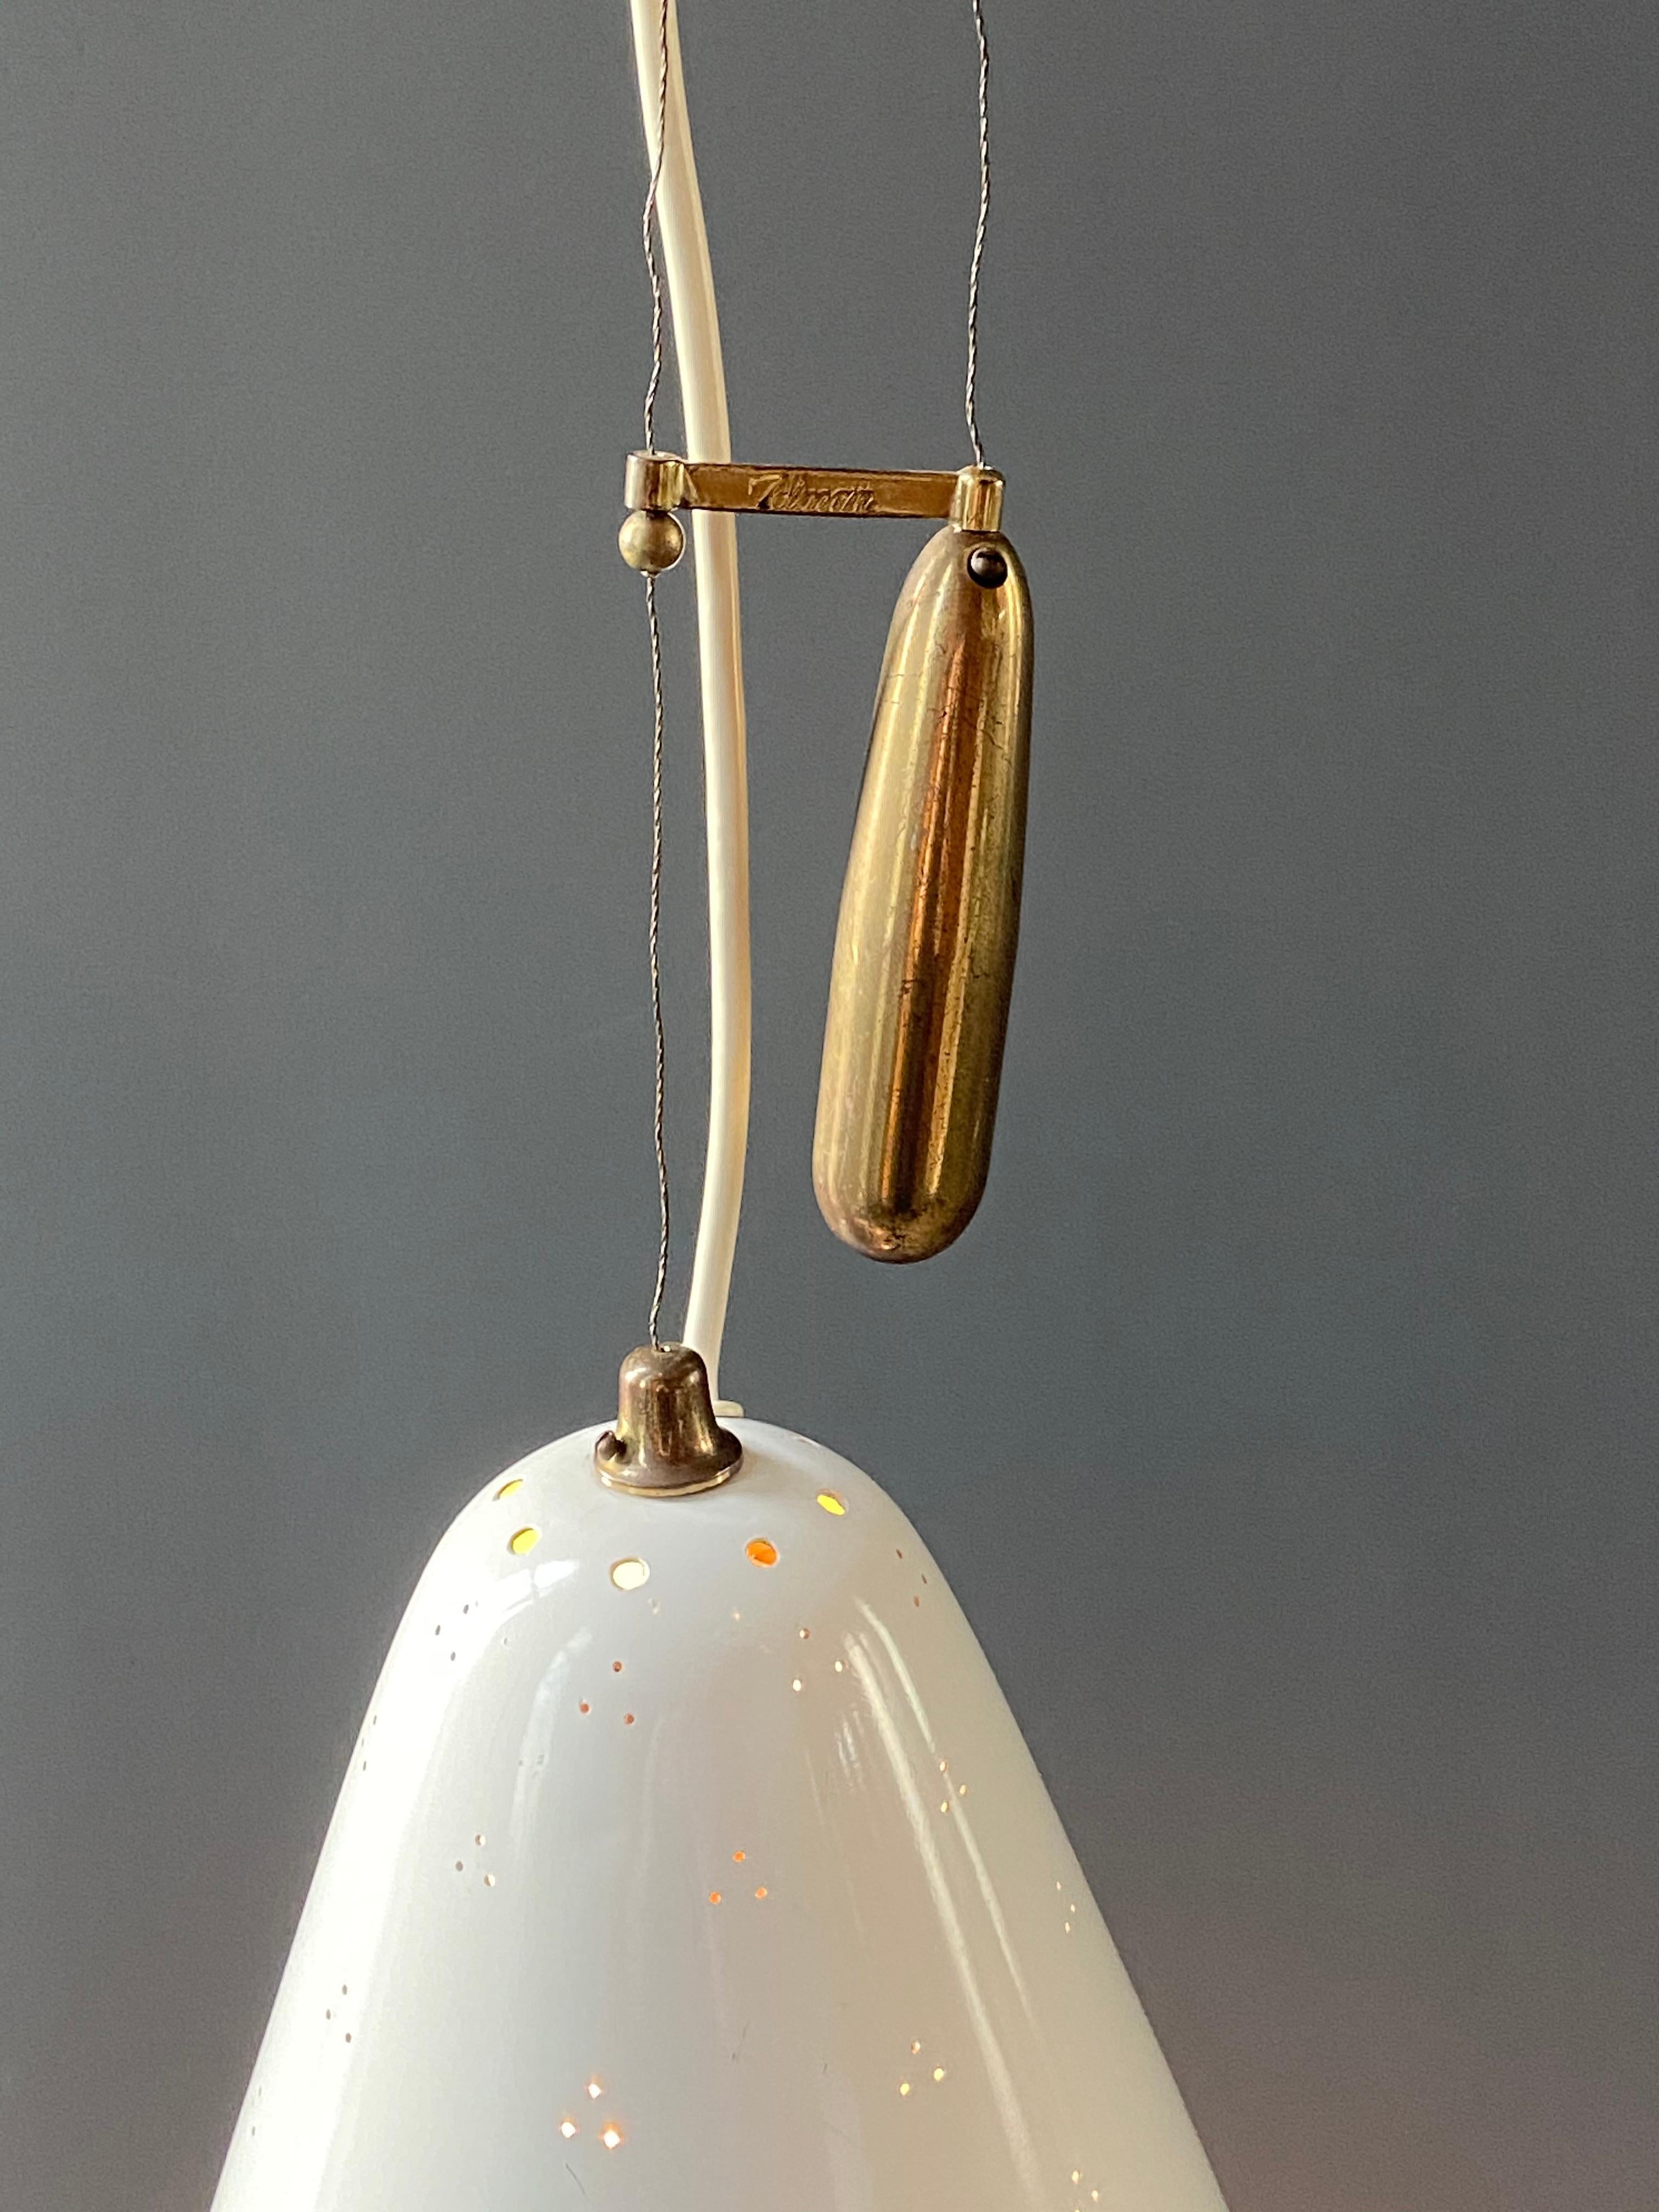 Mid century lighting designer Paavo Tynell's Counterbalance pendant light Model No. A 1942 was made by Idman Oy, circa 1950s. This is an adjustable ceiling light made of a brass canopy and counterweight with a white enameled metal bell shaped